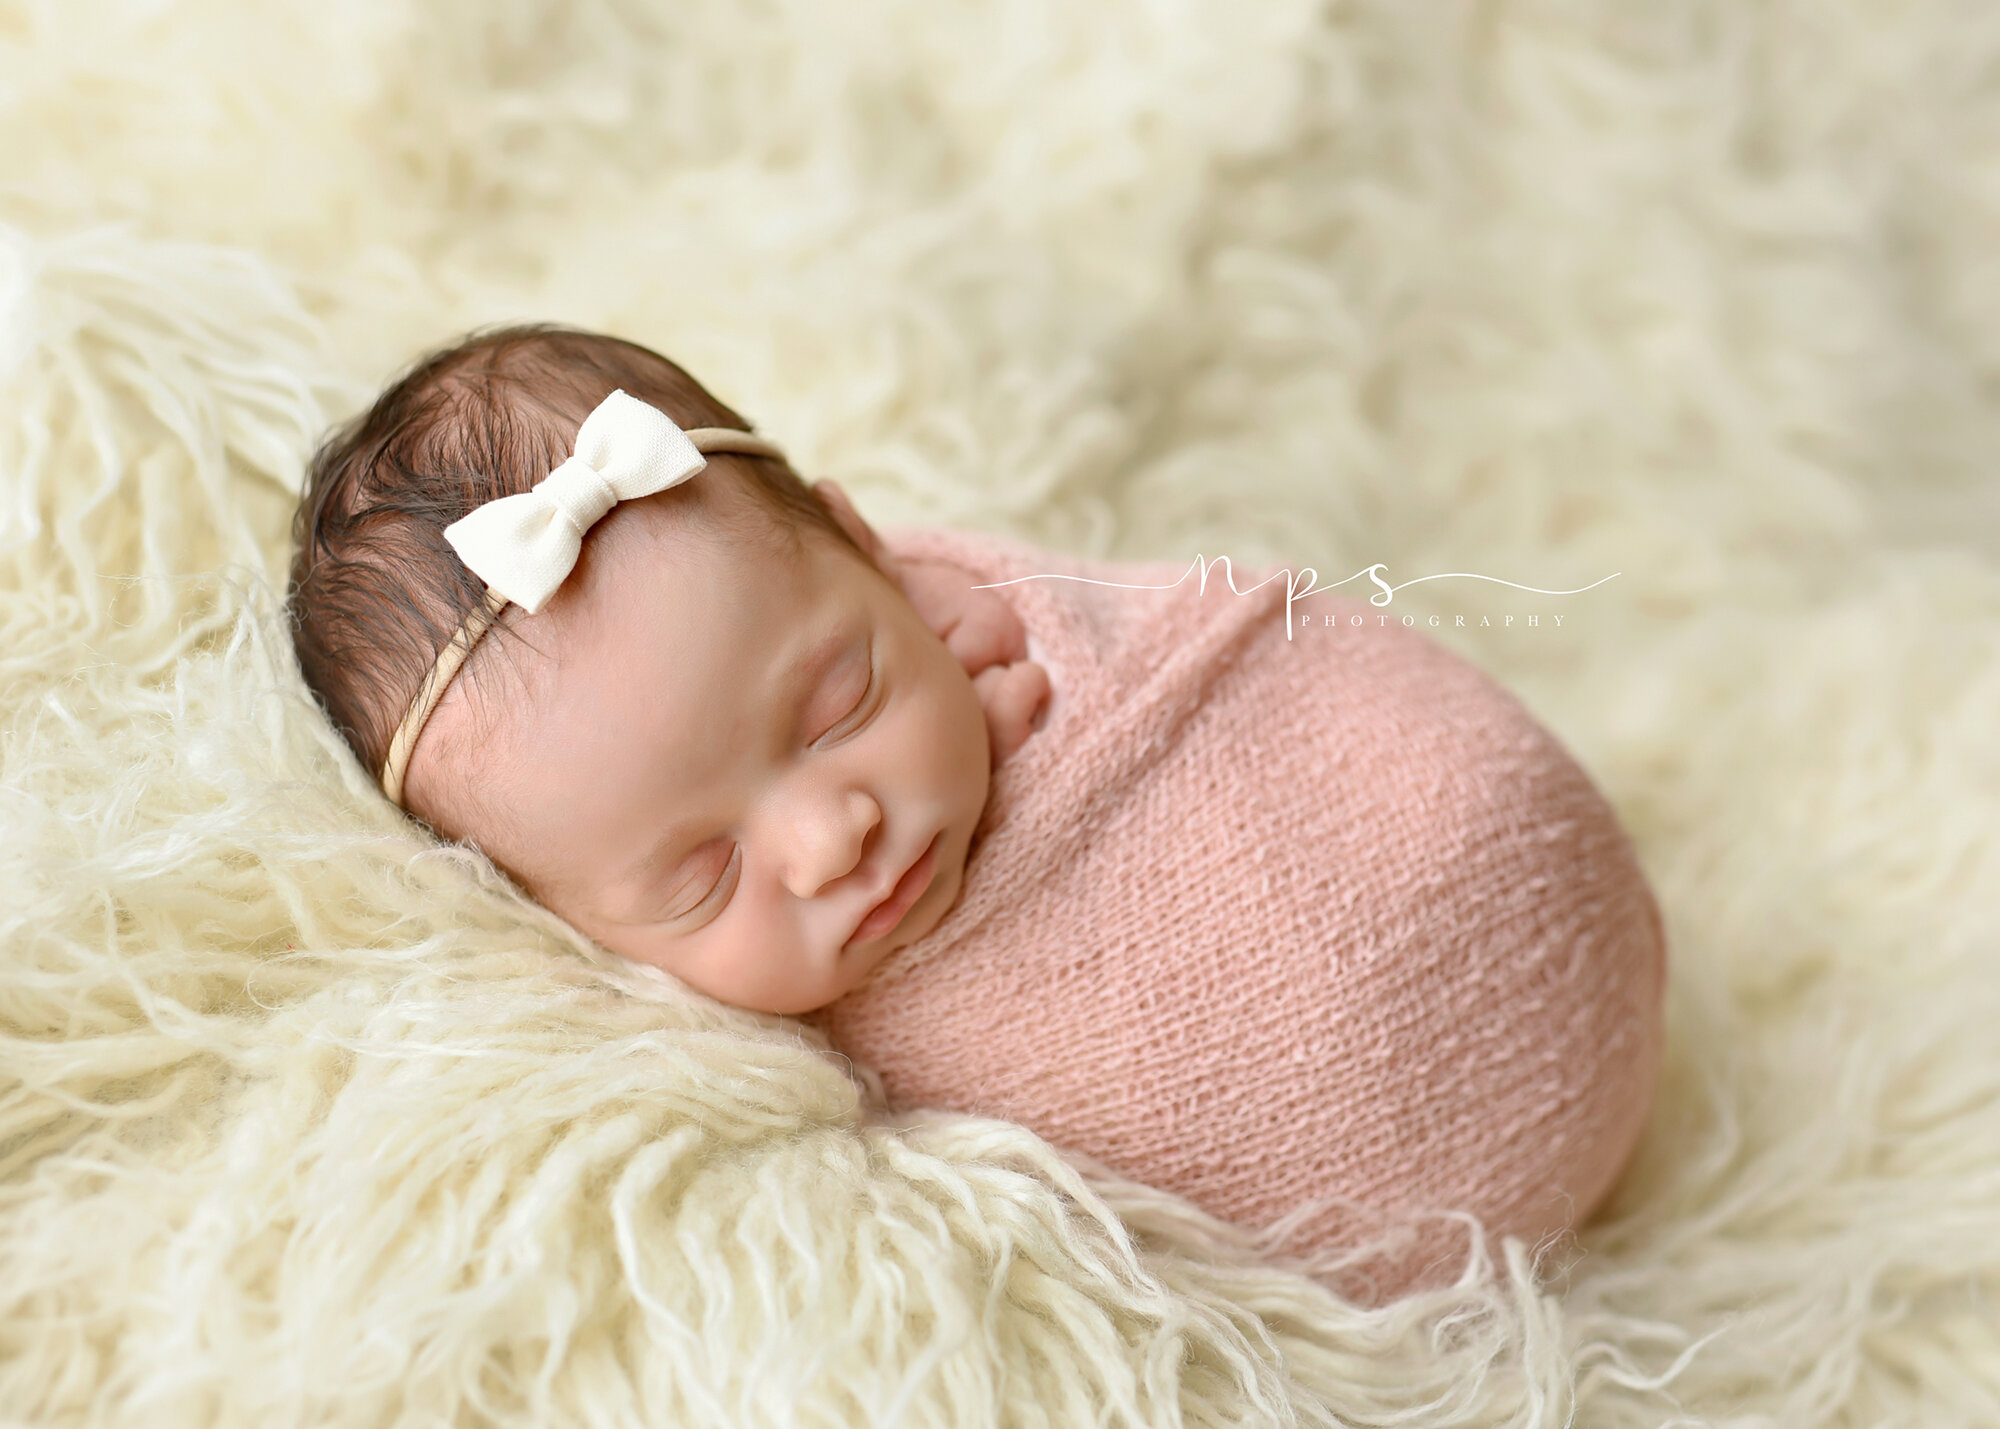 NPS-Photography-Moore County Newborn Photographer-Baby-G-002